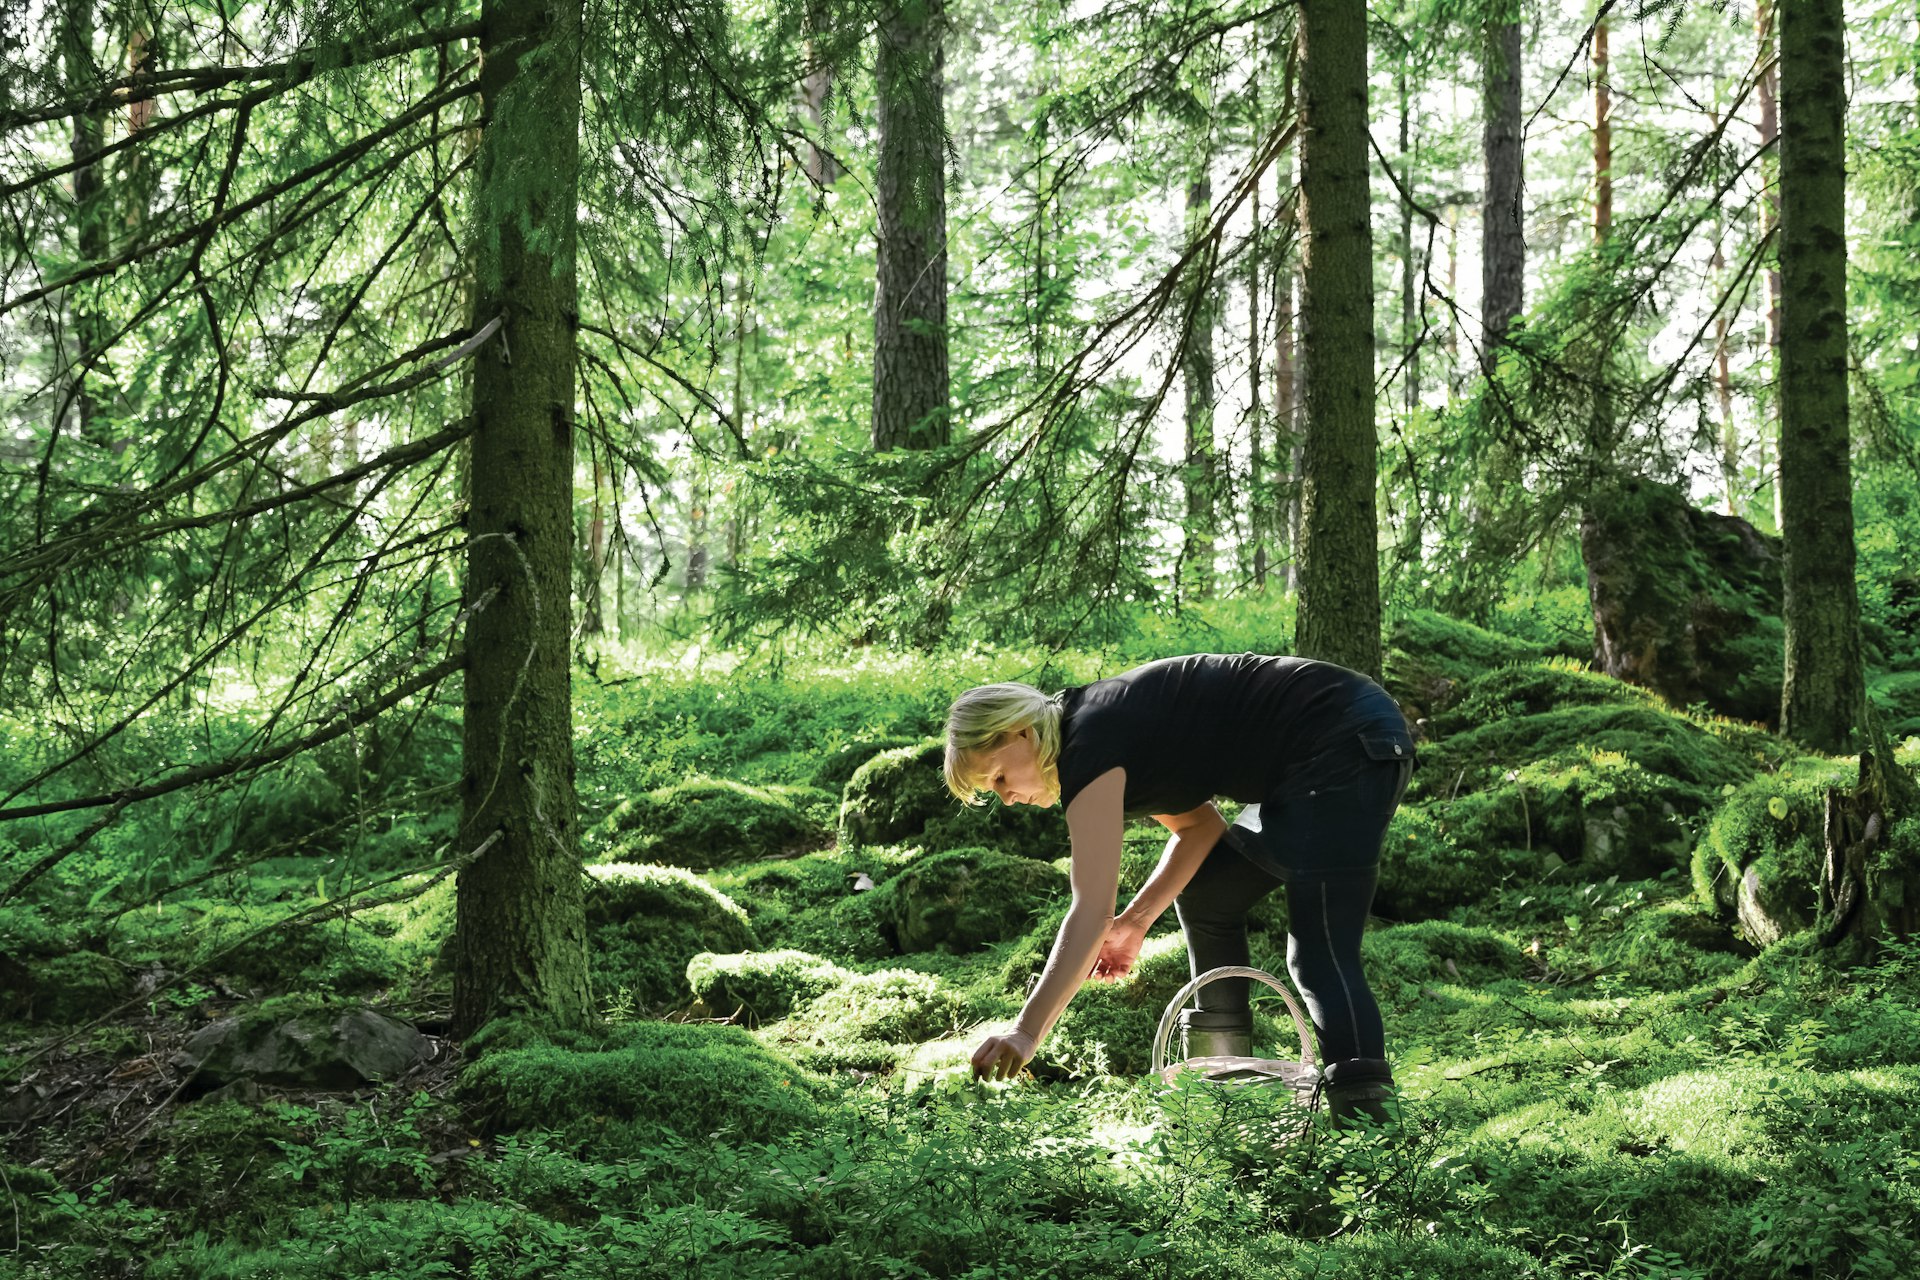 Photo of a woman bending down and reaching out to the forest floor in Kuopio, Finland. There is a wicker basket by her feet to collect what she forages. The evergreen forest is dense with greenery but sunlight manages to dapple the mossy ground.